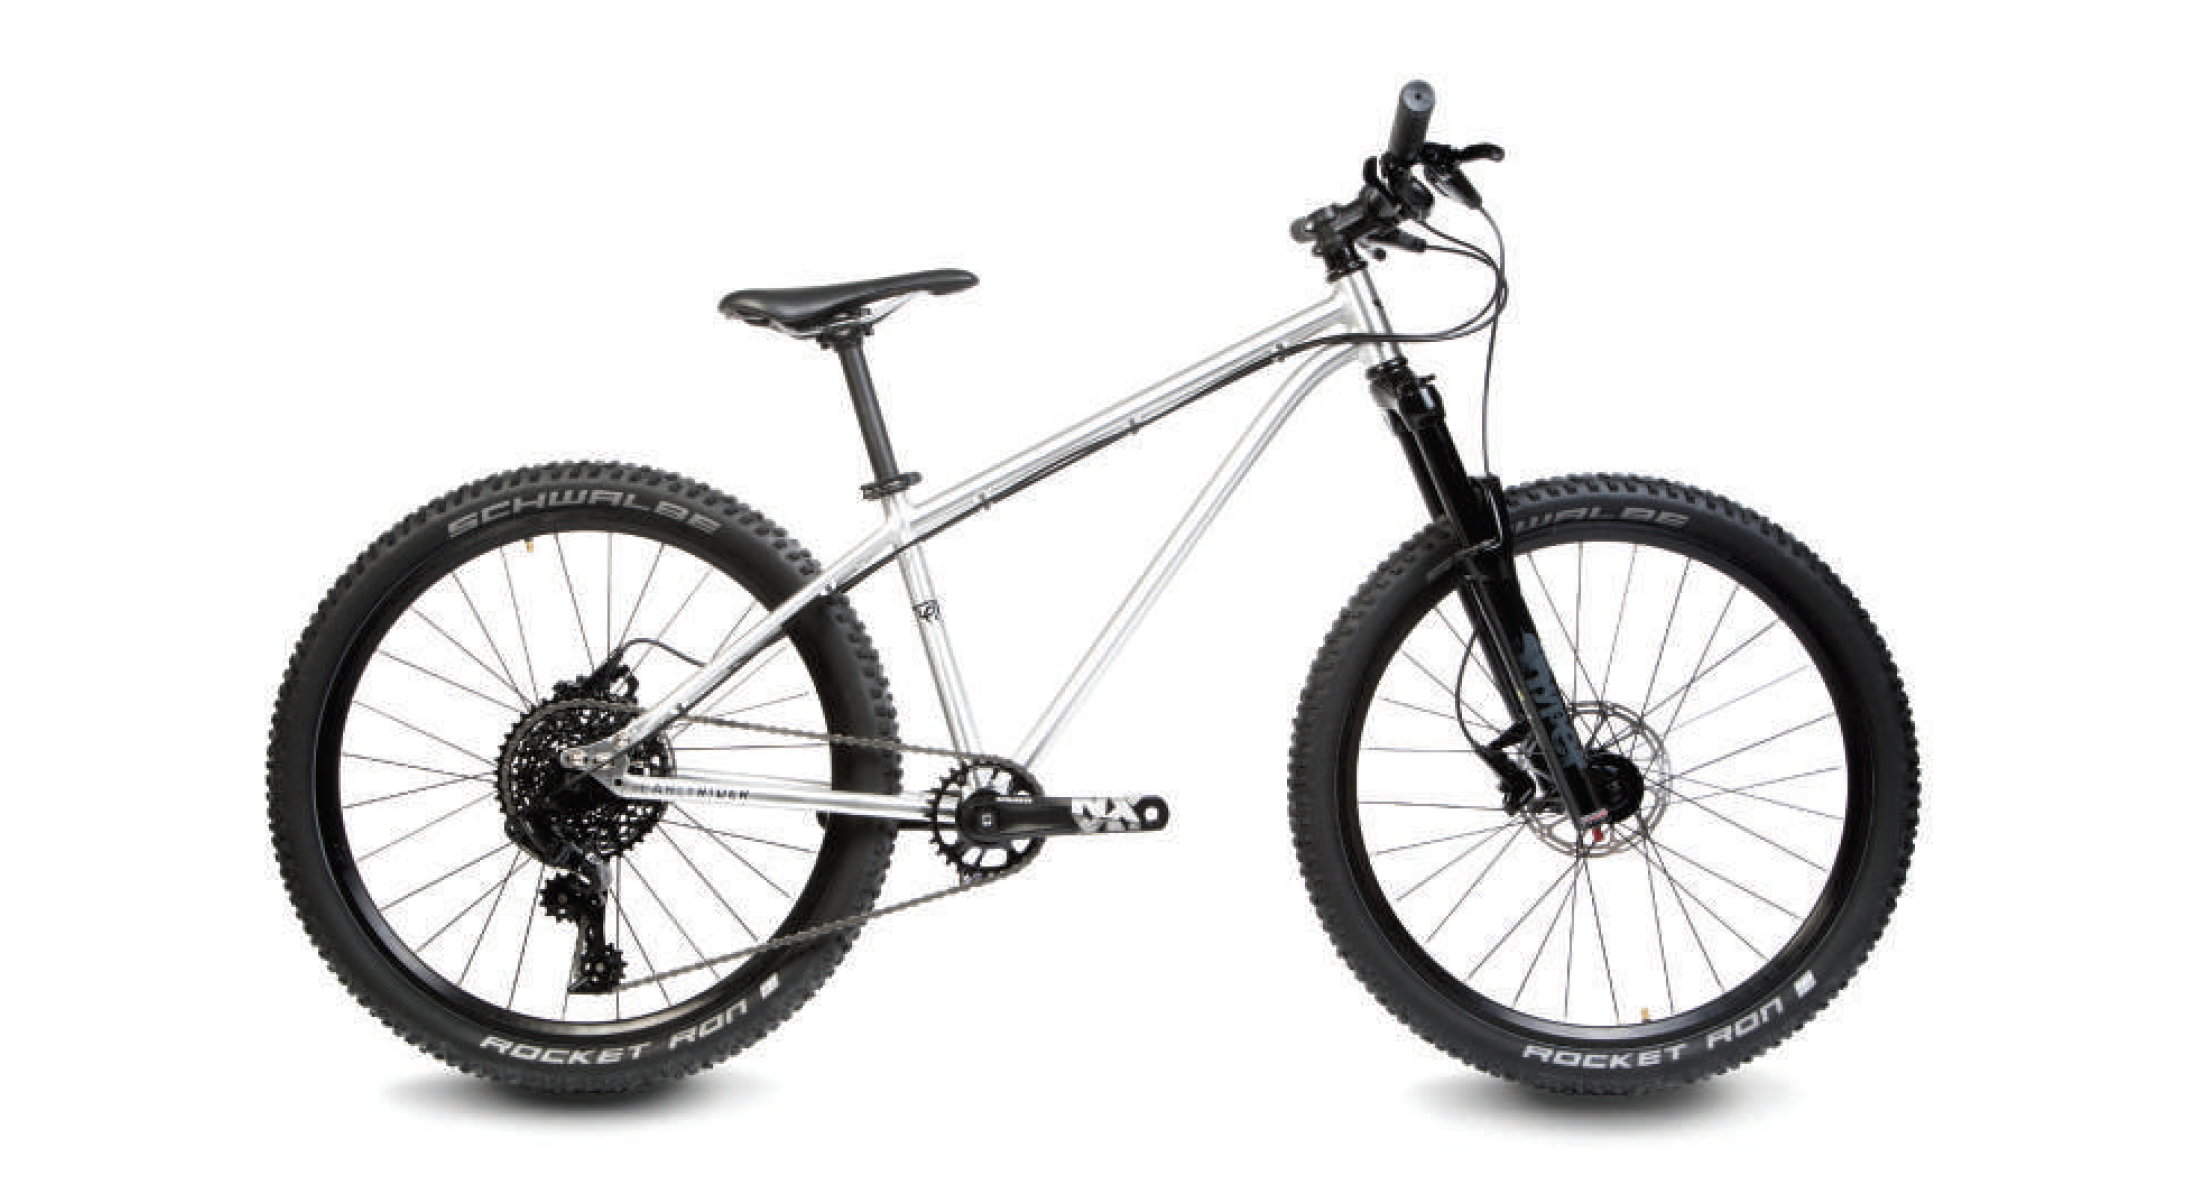 The Early Rider T24 Works Edition aluminum hardtail is outfitted with a mix of SRAM and Ritchey components and lightweight Maxxis trail tires. It retails for ,299.